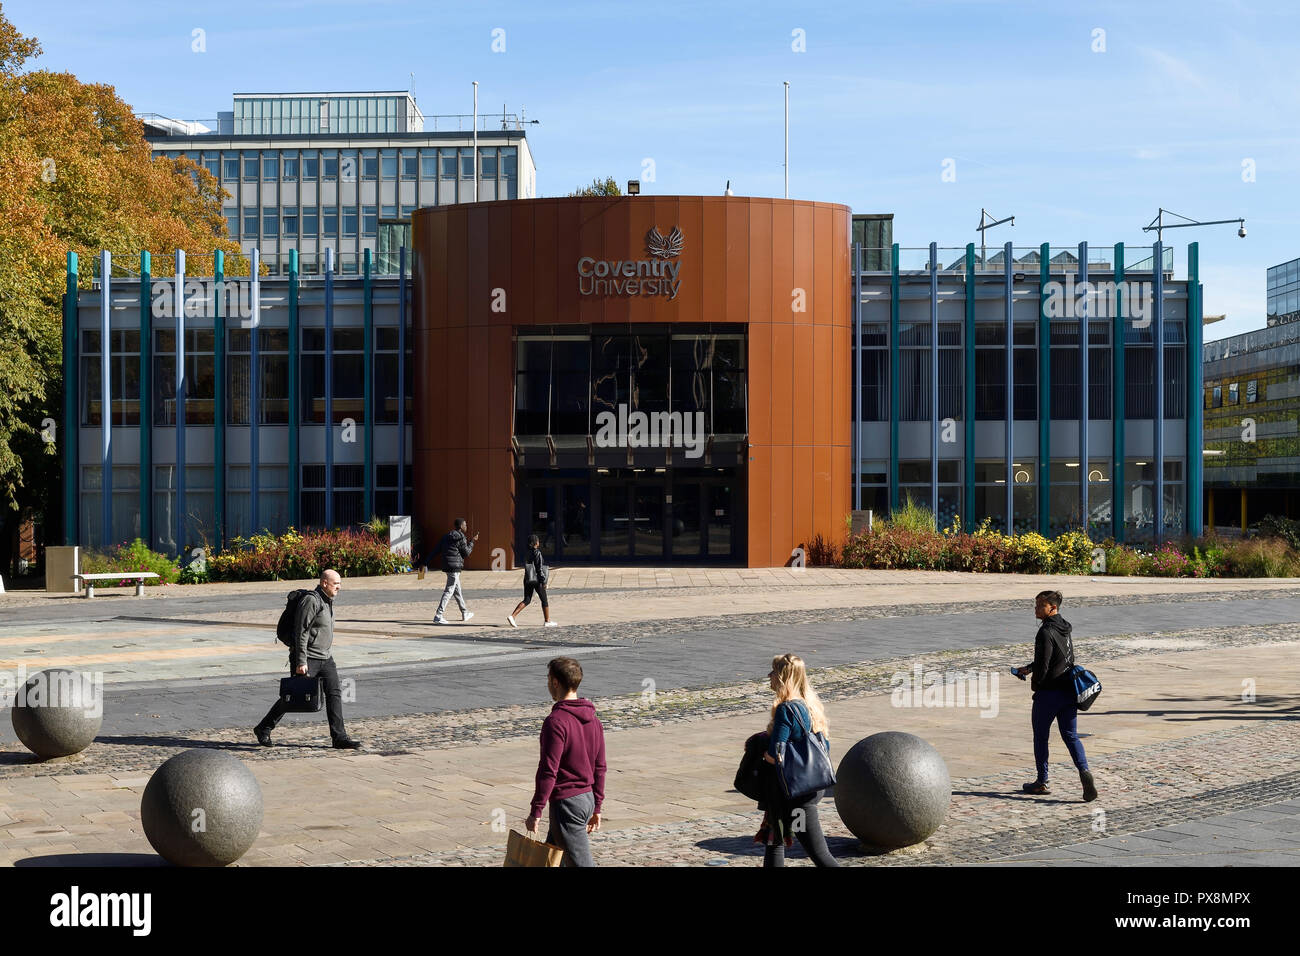 The Coventry University Alan Berry building on University Square in Coventry city centre UK Stock Photo